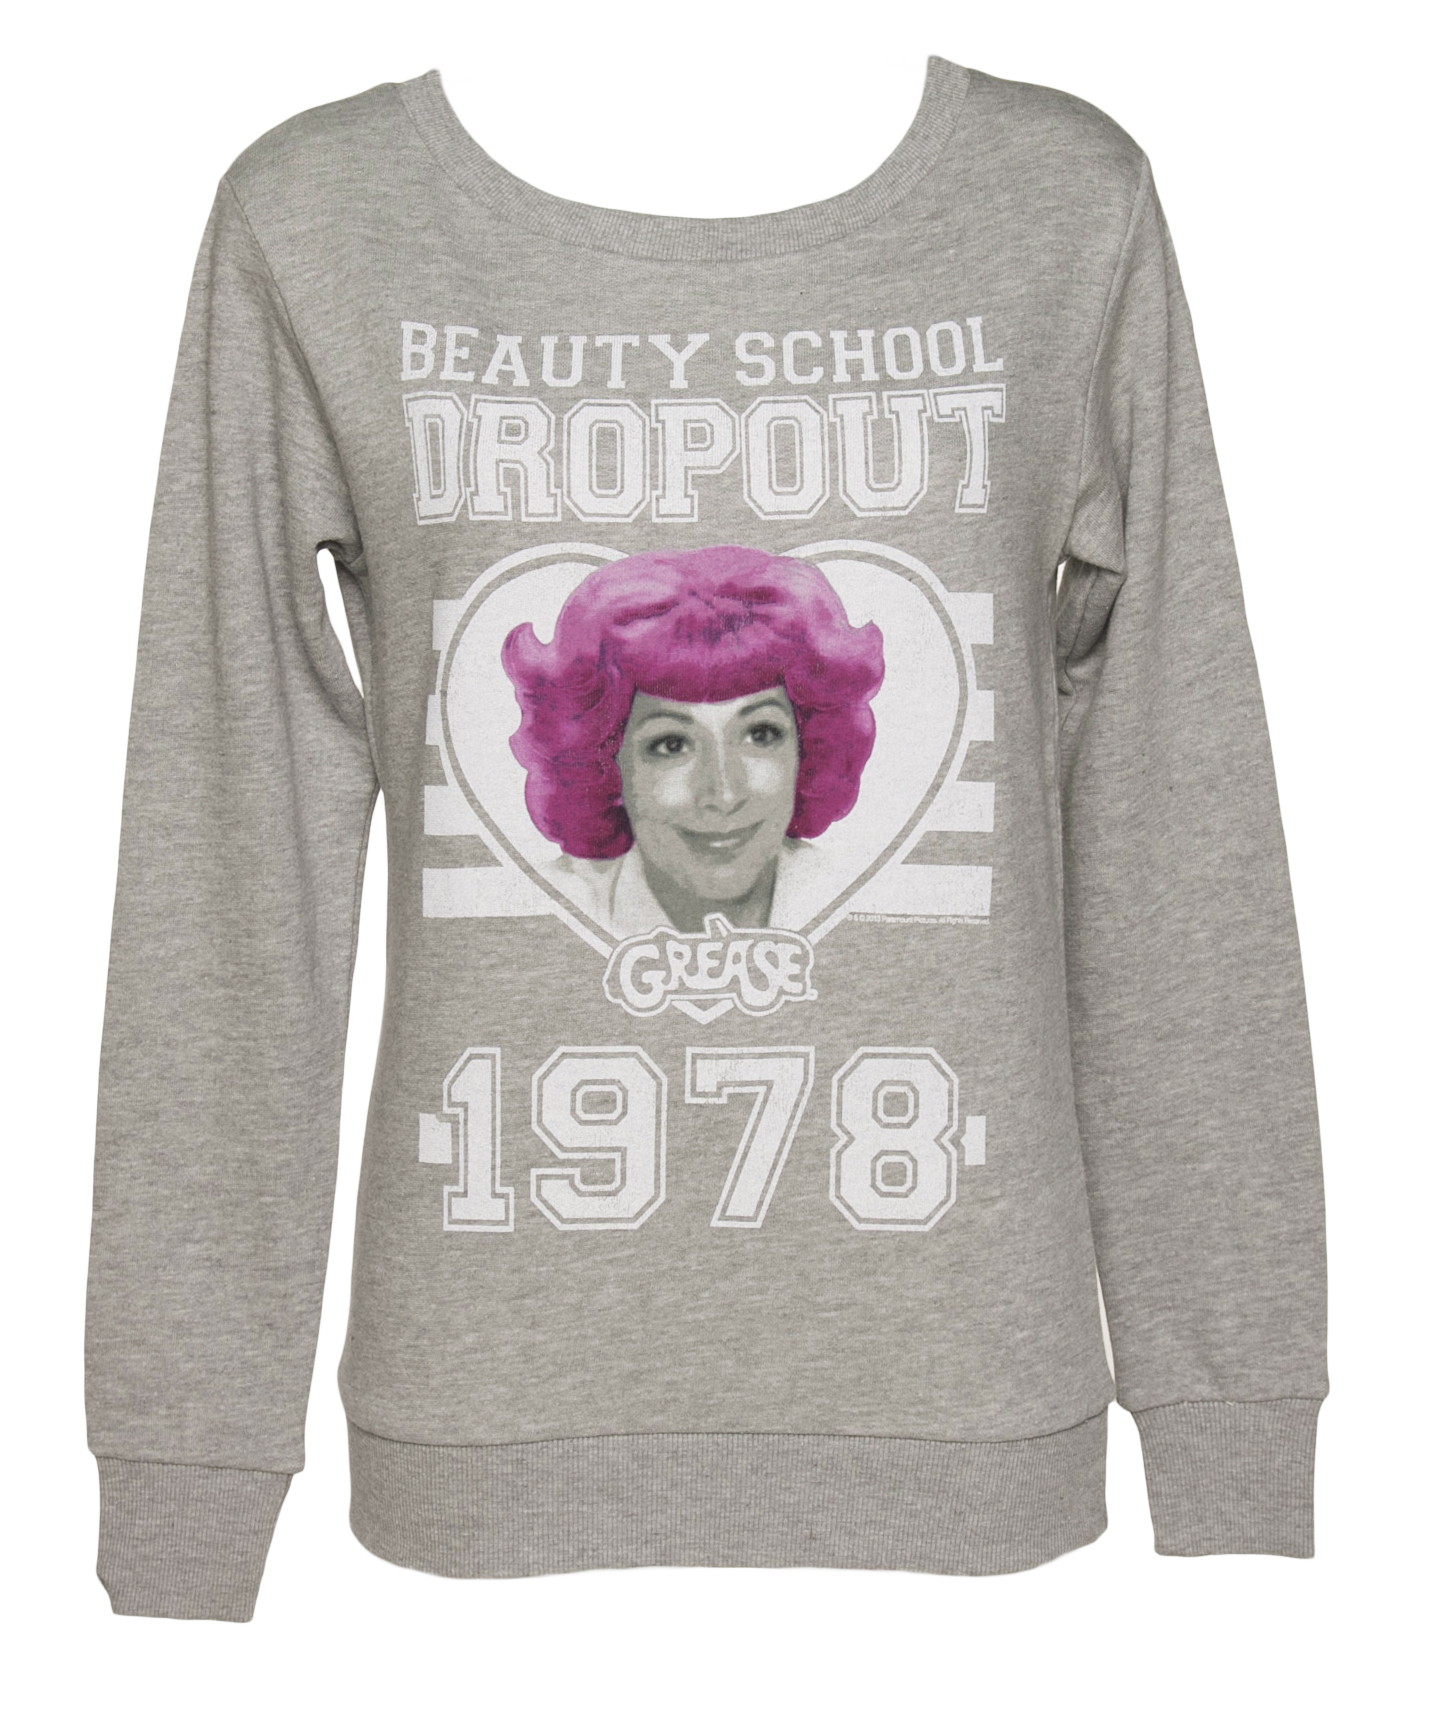 Ladies Grease Beauty School Dropout Sweater £29.99